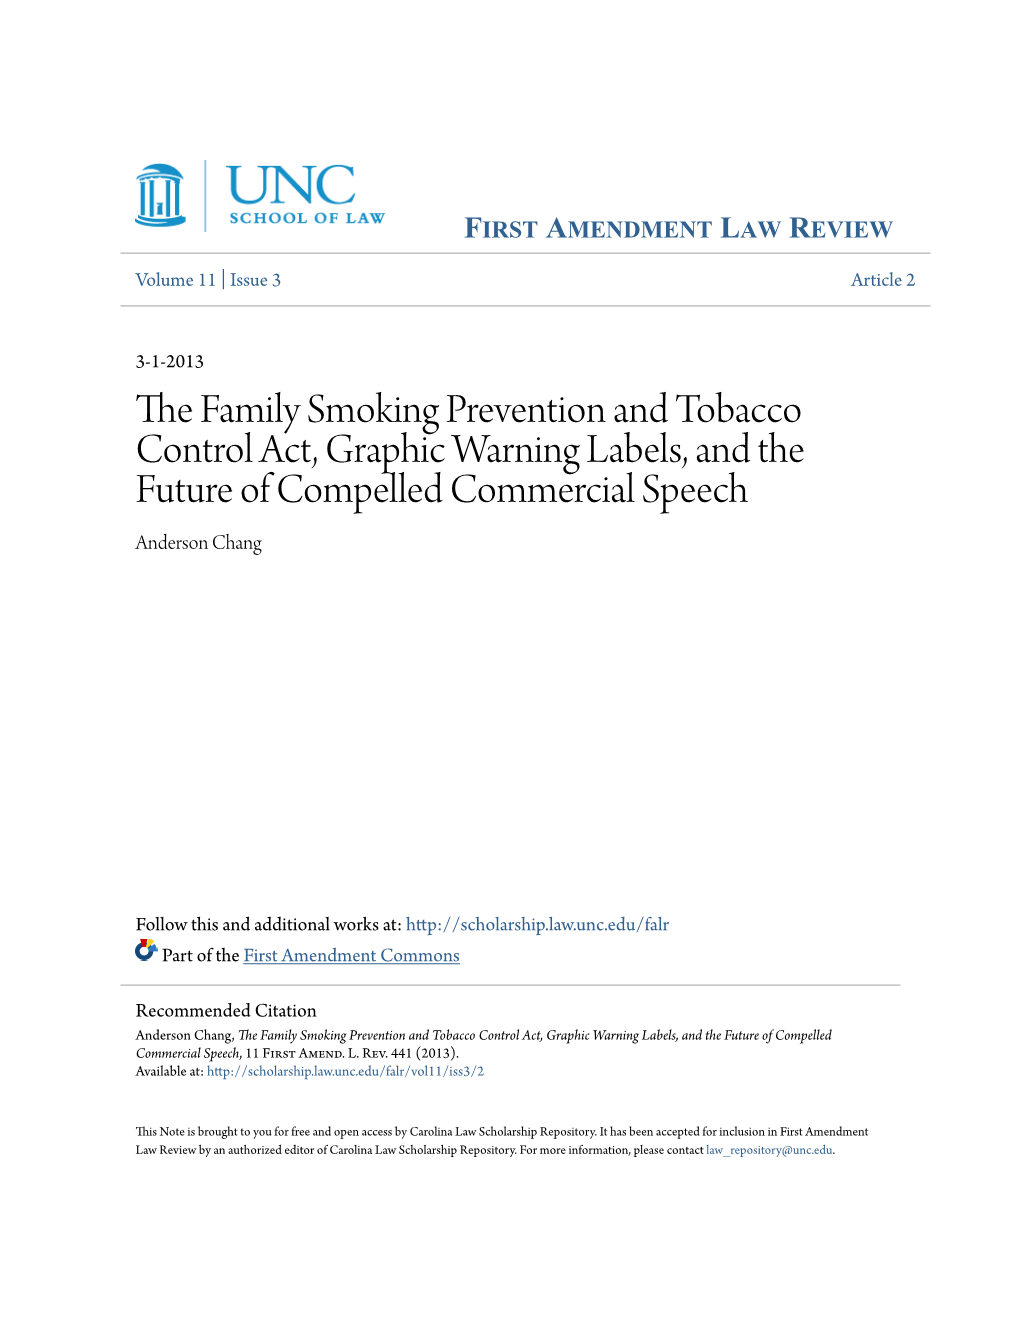 The Family Smoking Prevention and Tobacco Control Act, Graphic Warning Labels, and the Future of Compelled Commercial Speech, 11 First Amend